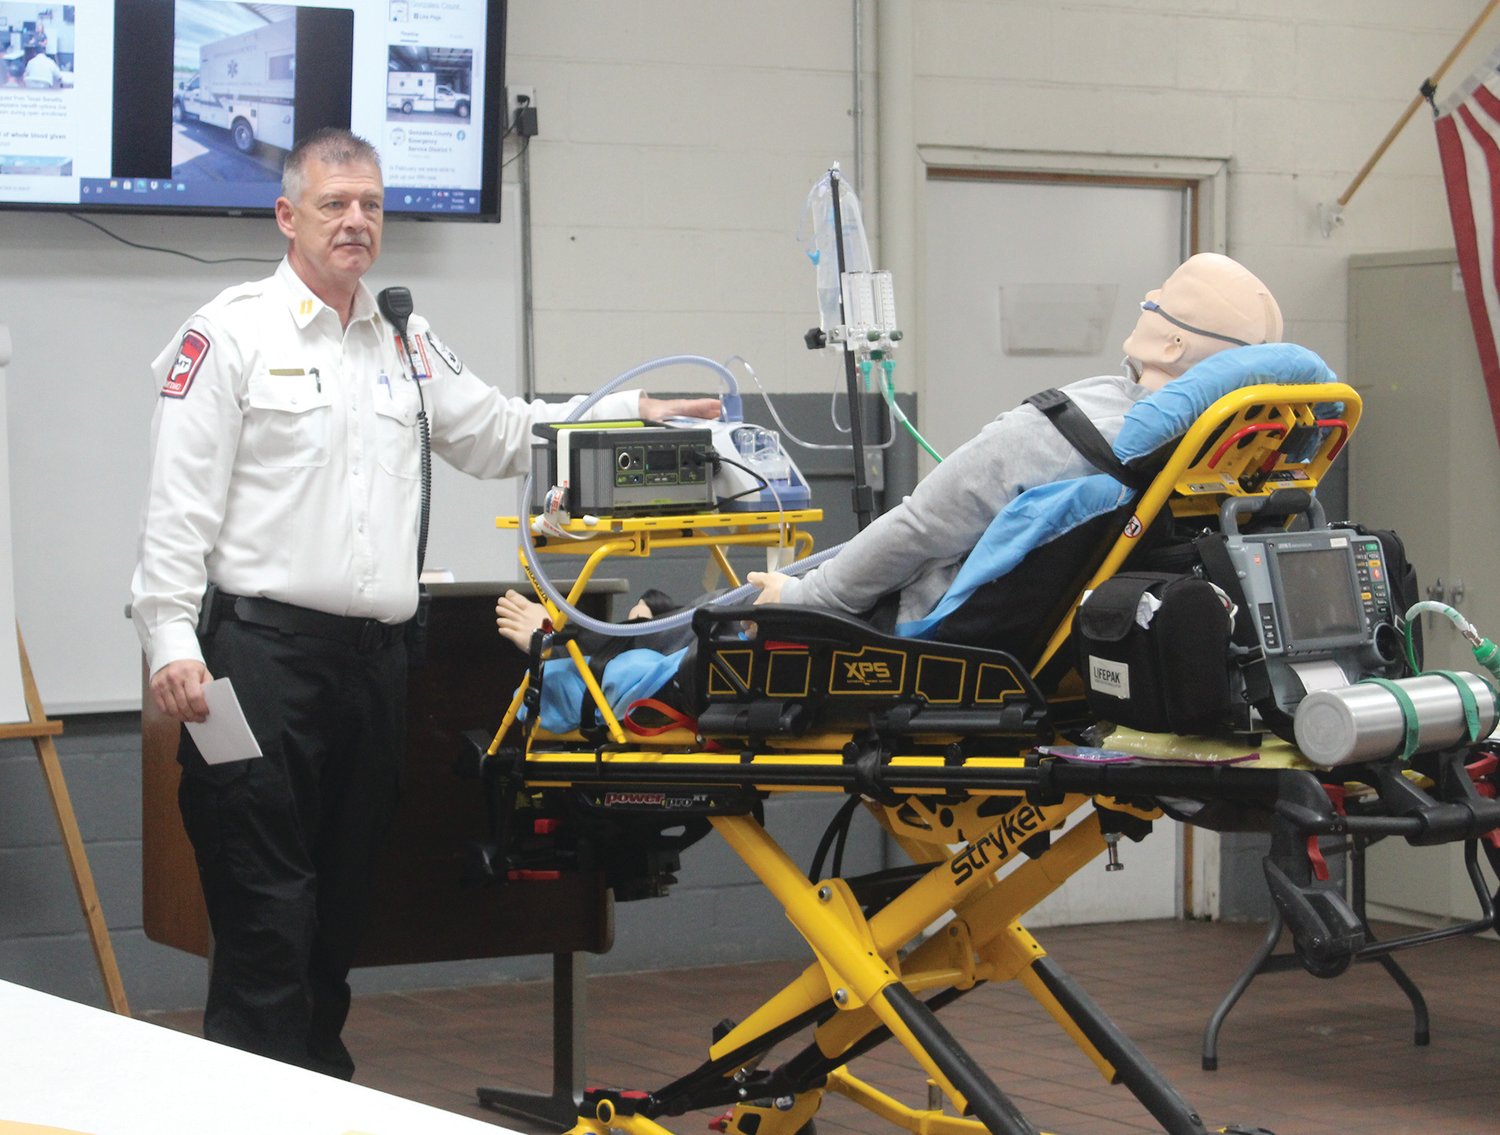 EMS Captain Scott Evan gave a demonstration of the new oxygen machine purchased by the district.